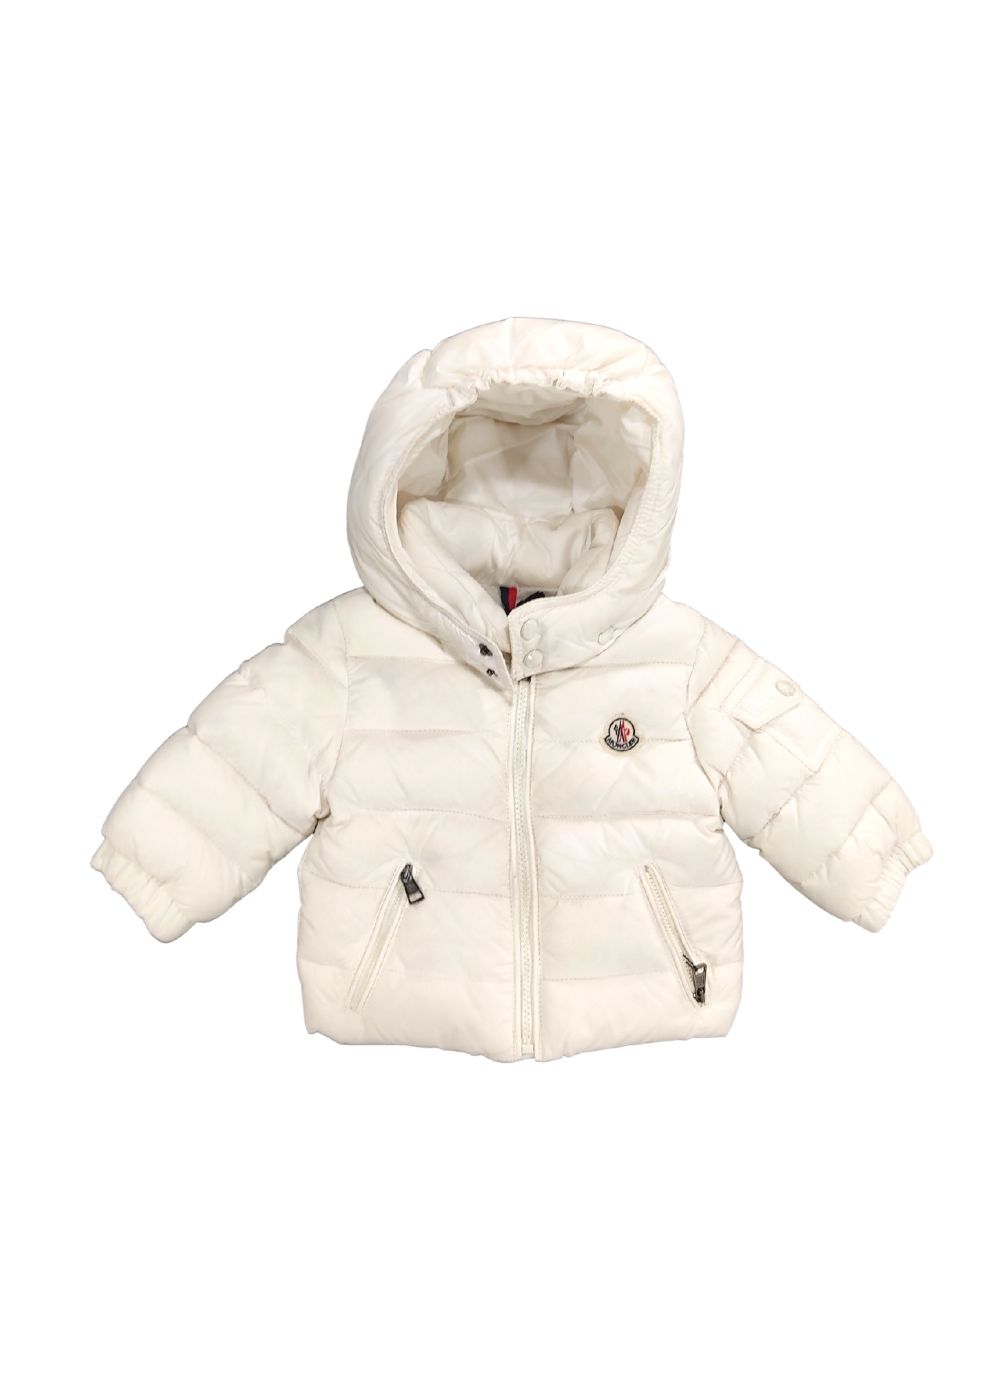 Featured image for “MONCLER GIUBBOTTO BIANCO NEONATO”